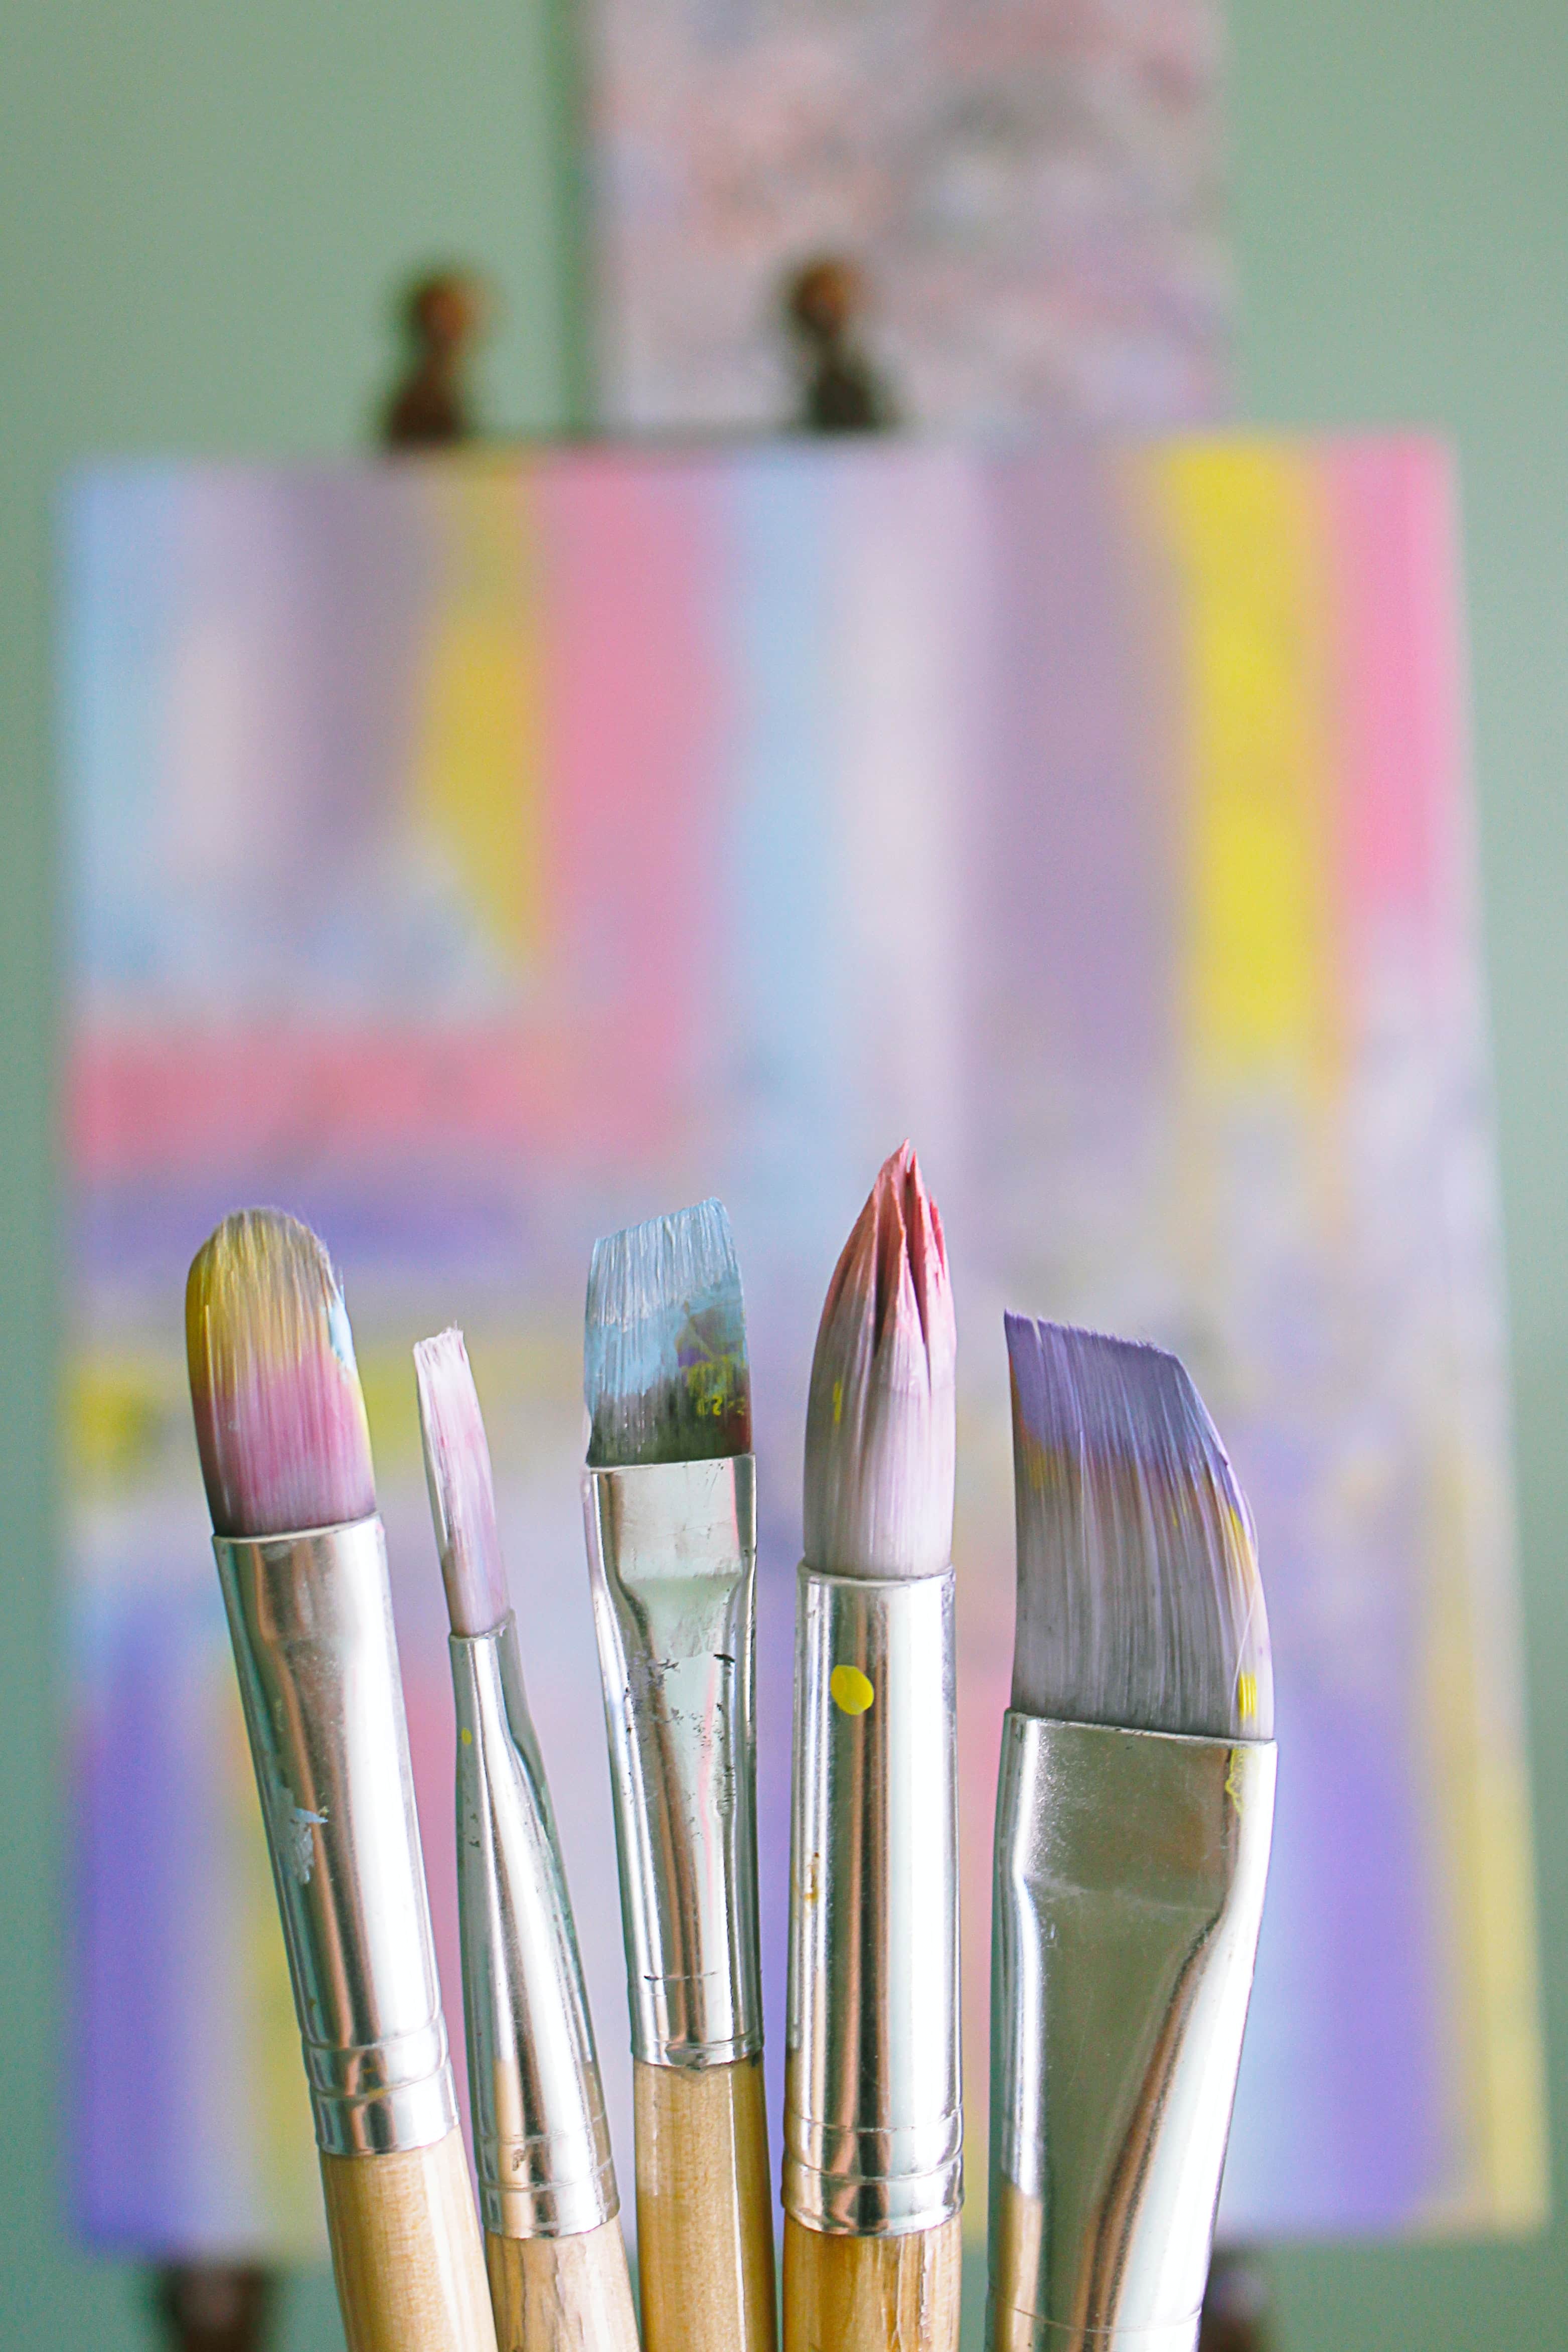 Image of paintbrushes covered in colorful paints in front of an out of focus canvas